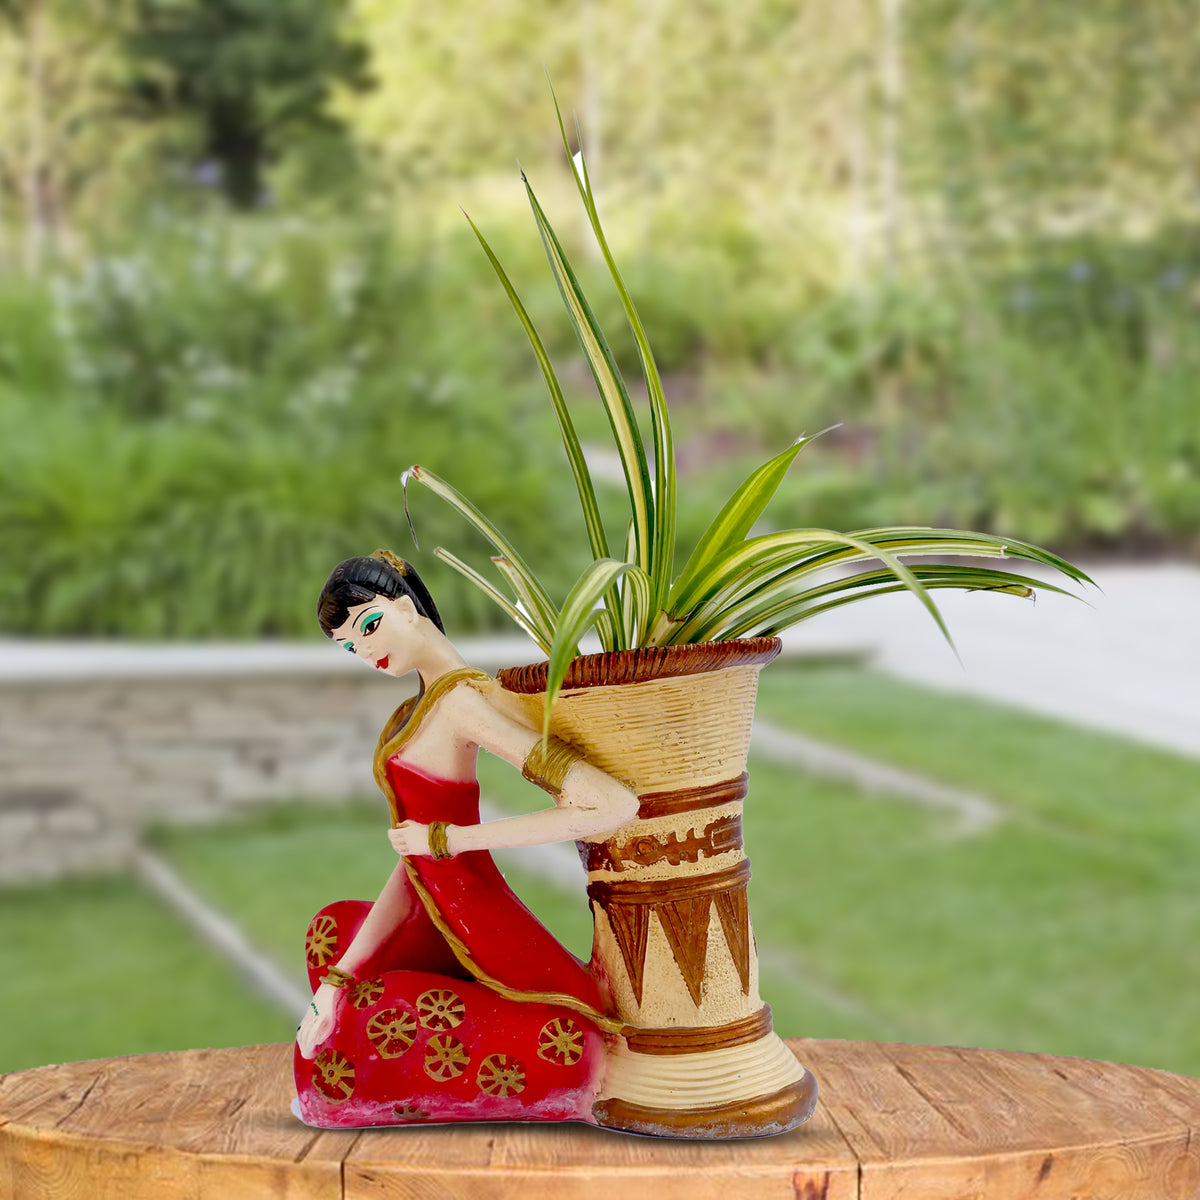 The Planter Girl, the perfect addition to your indoor or outdoor garden. This girl planter adds a touch of whimsy and charm, enhancing any plant it holds. Handcrafted with care, it is a unique and delightful way to showcase your greenery. Experience the joy of gardening with EVA-The Planter Girl.